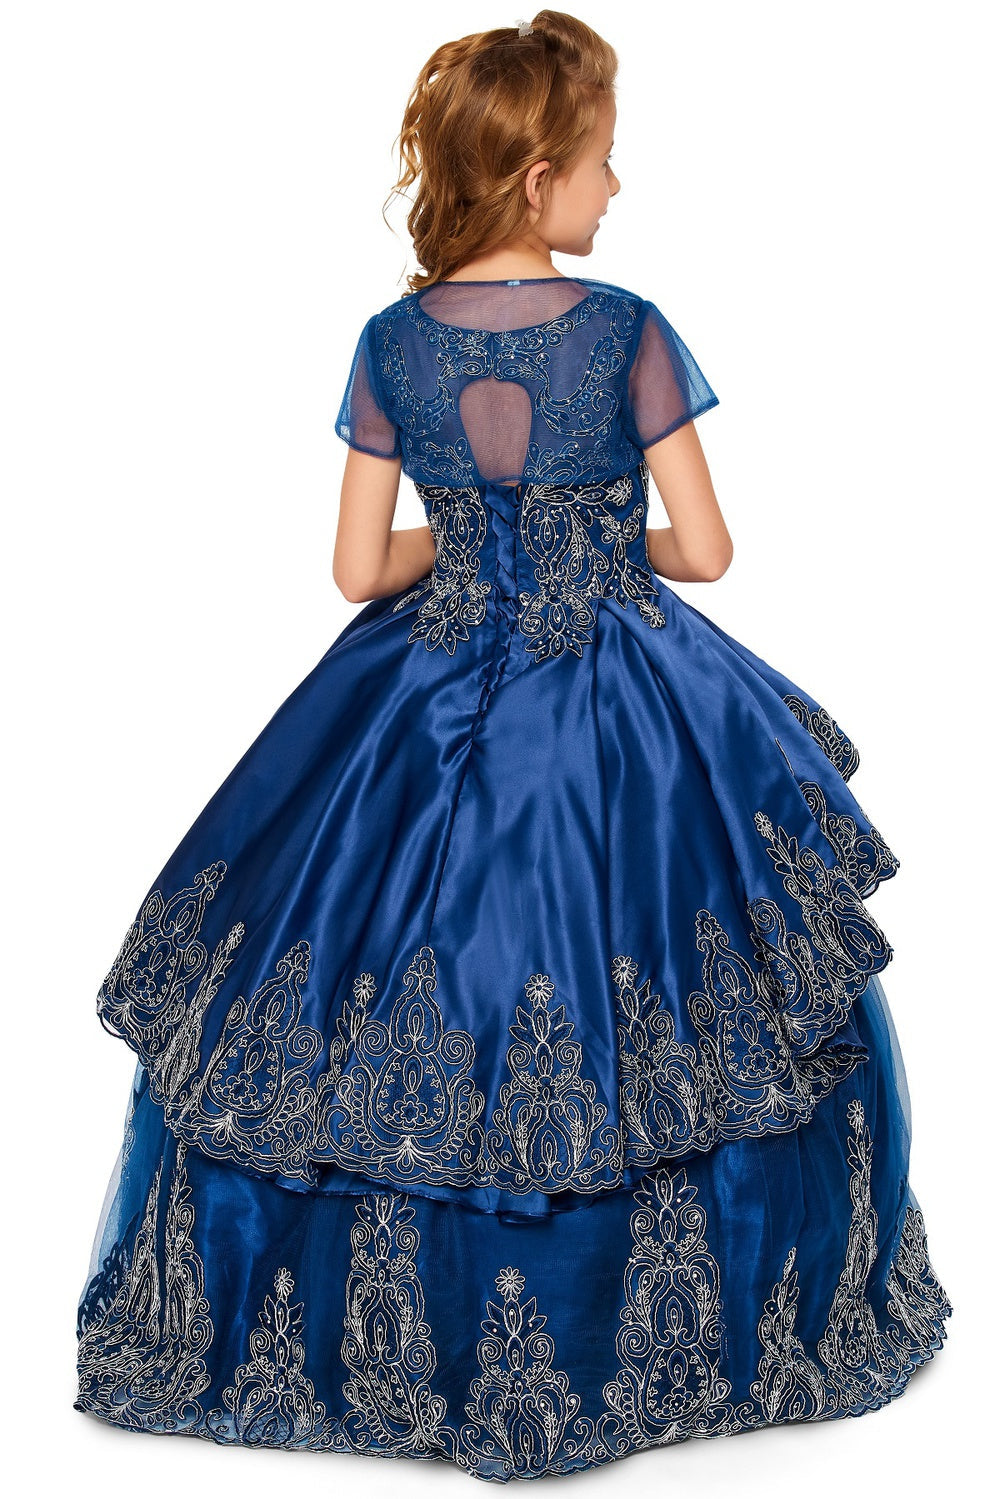 Elegant Breathtaking Metallic Coiled Embroidered Stone Quinceanera Kids Dress CU8018 Elsy Style Kids Dress